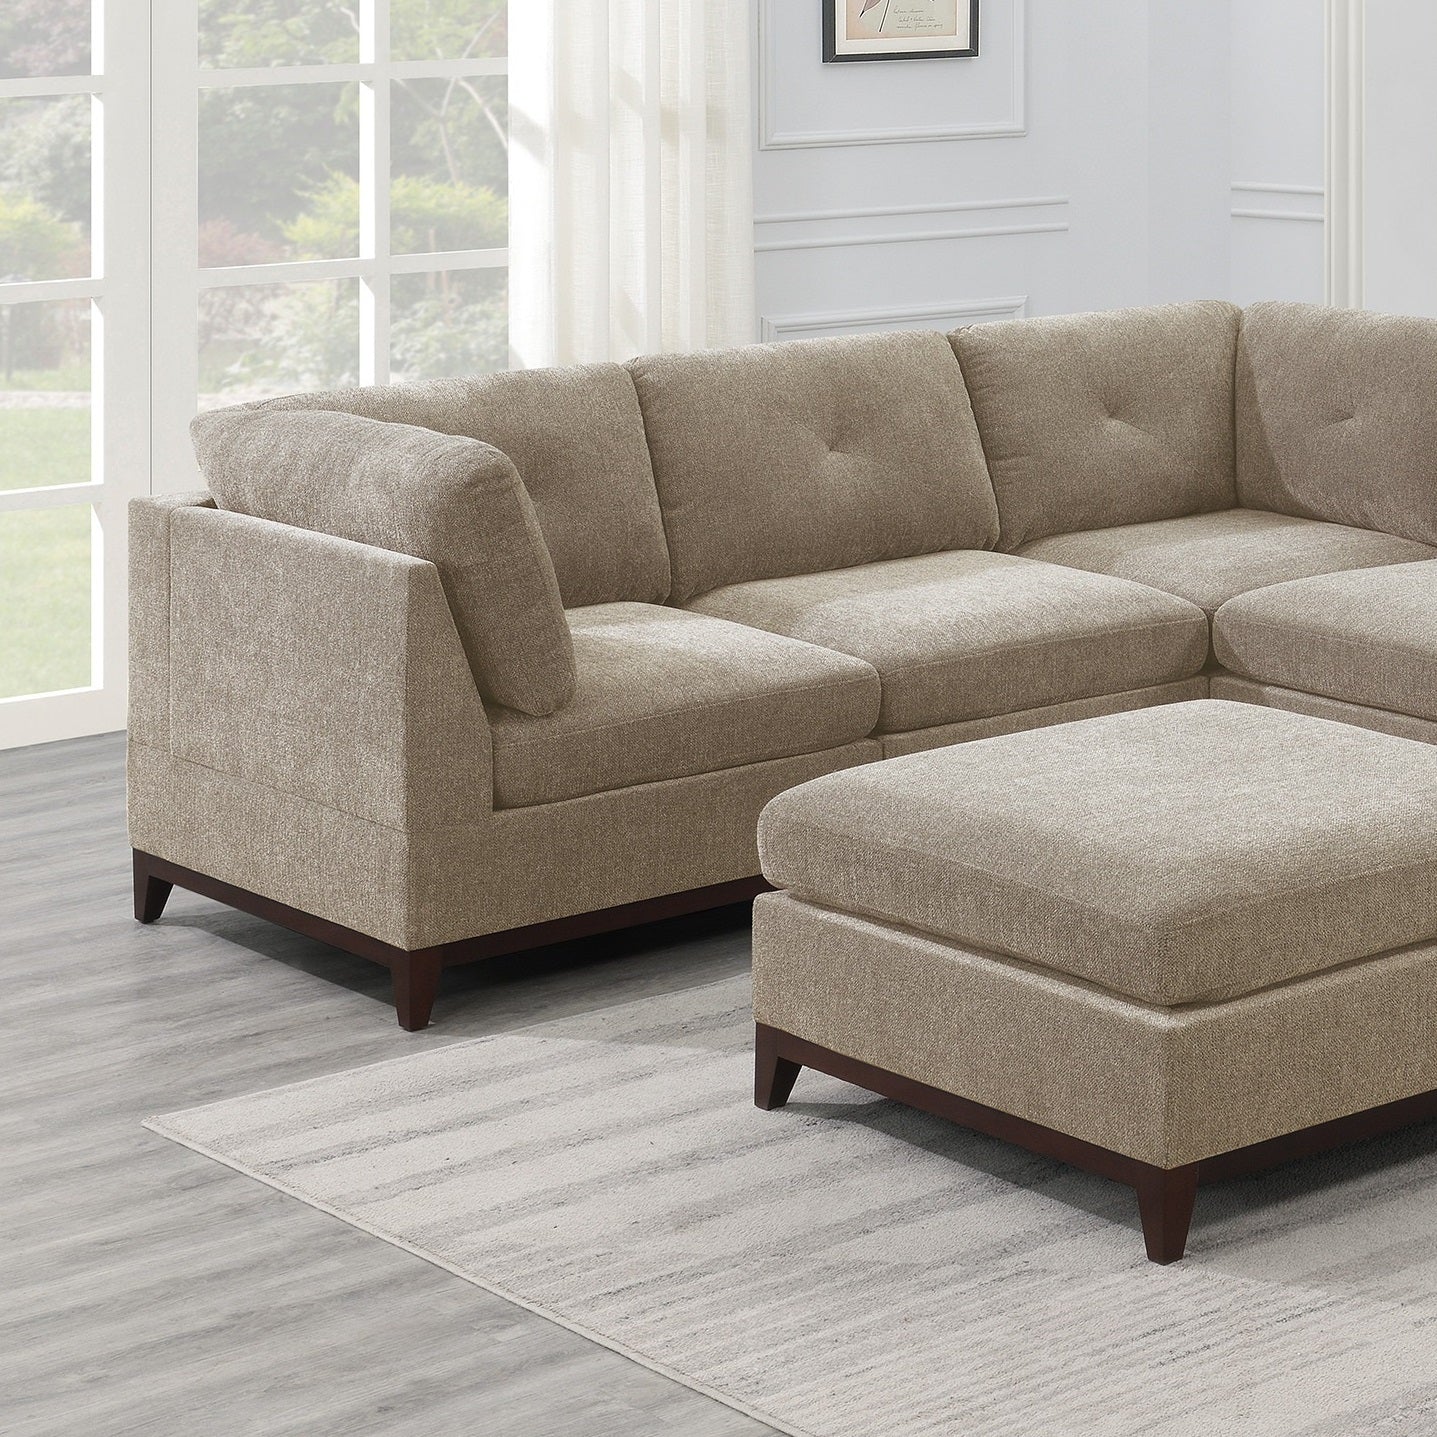 6-Piece Tufted Camel Brown Chenille Modular Sectional